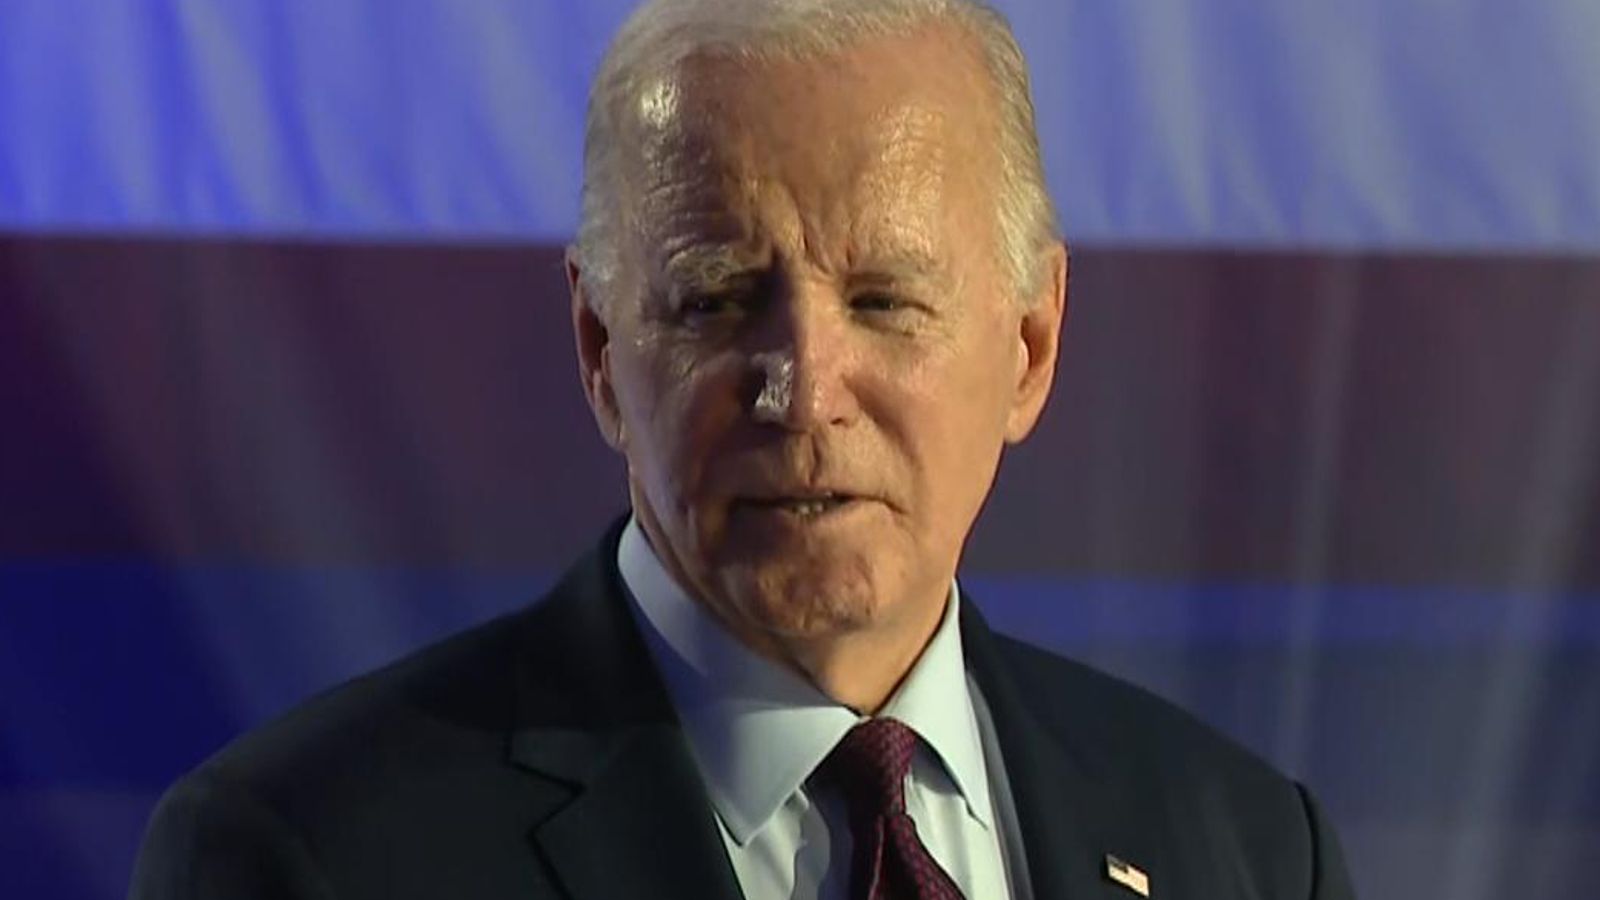 Israel-Hamas war: Joe Biden says he hopes Gaza ceasefire can be agreed 'by end of the weekend'